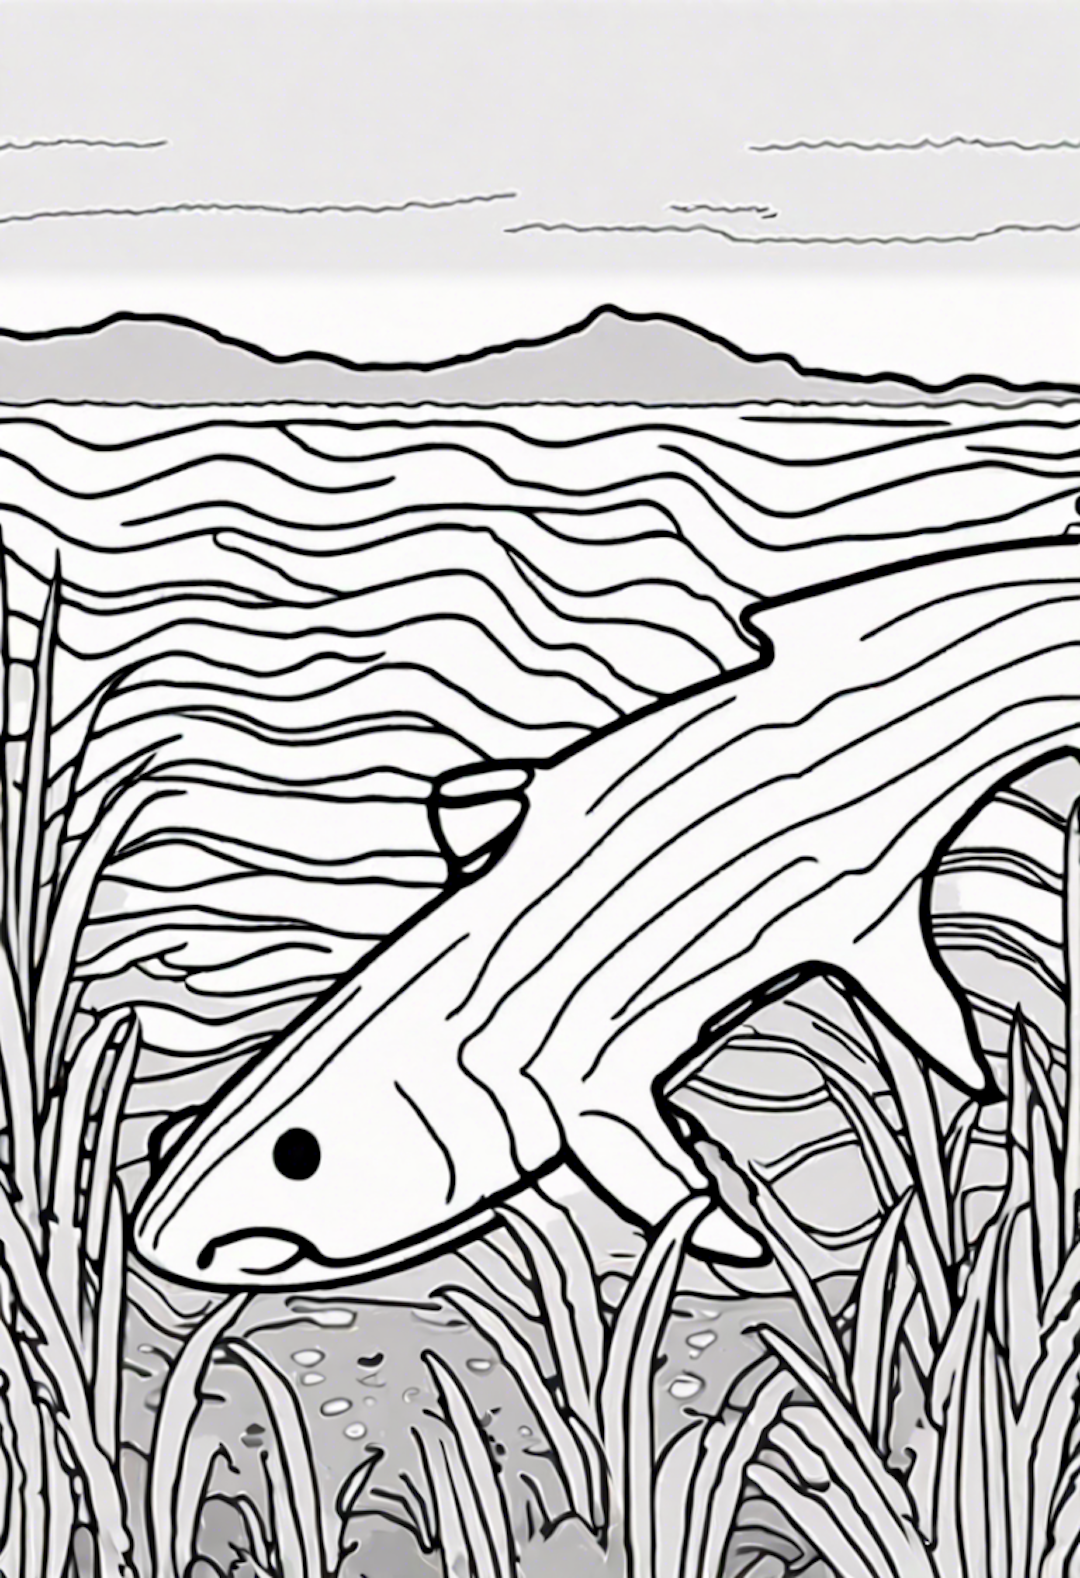 Zebra Shark coloring pages